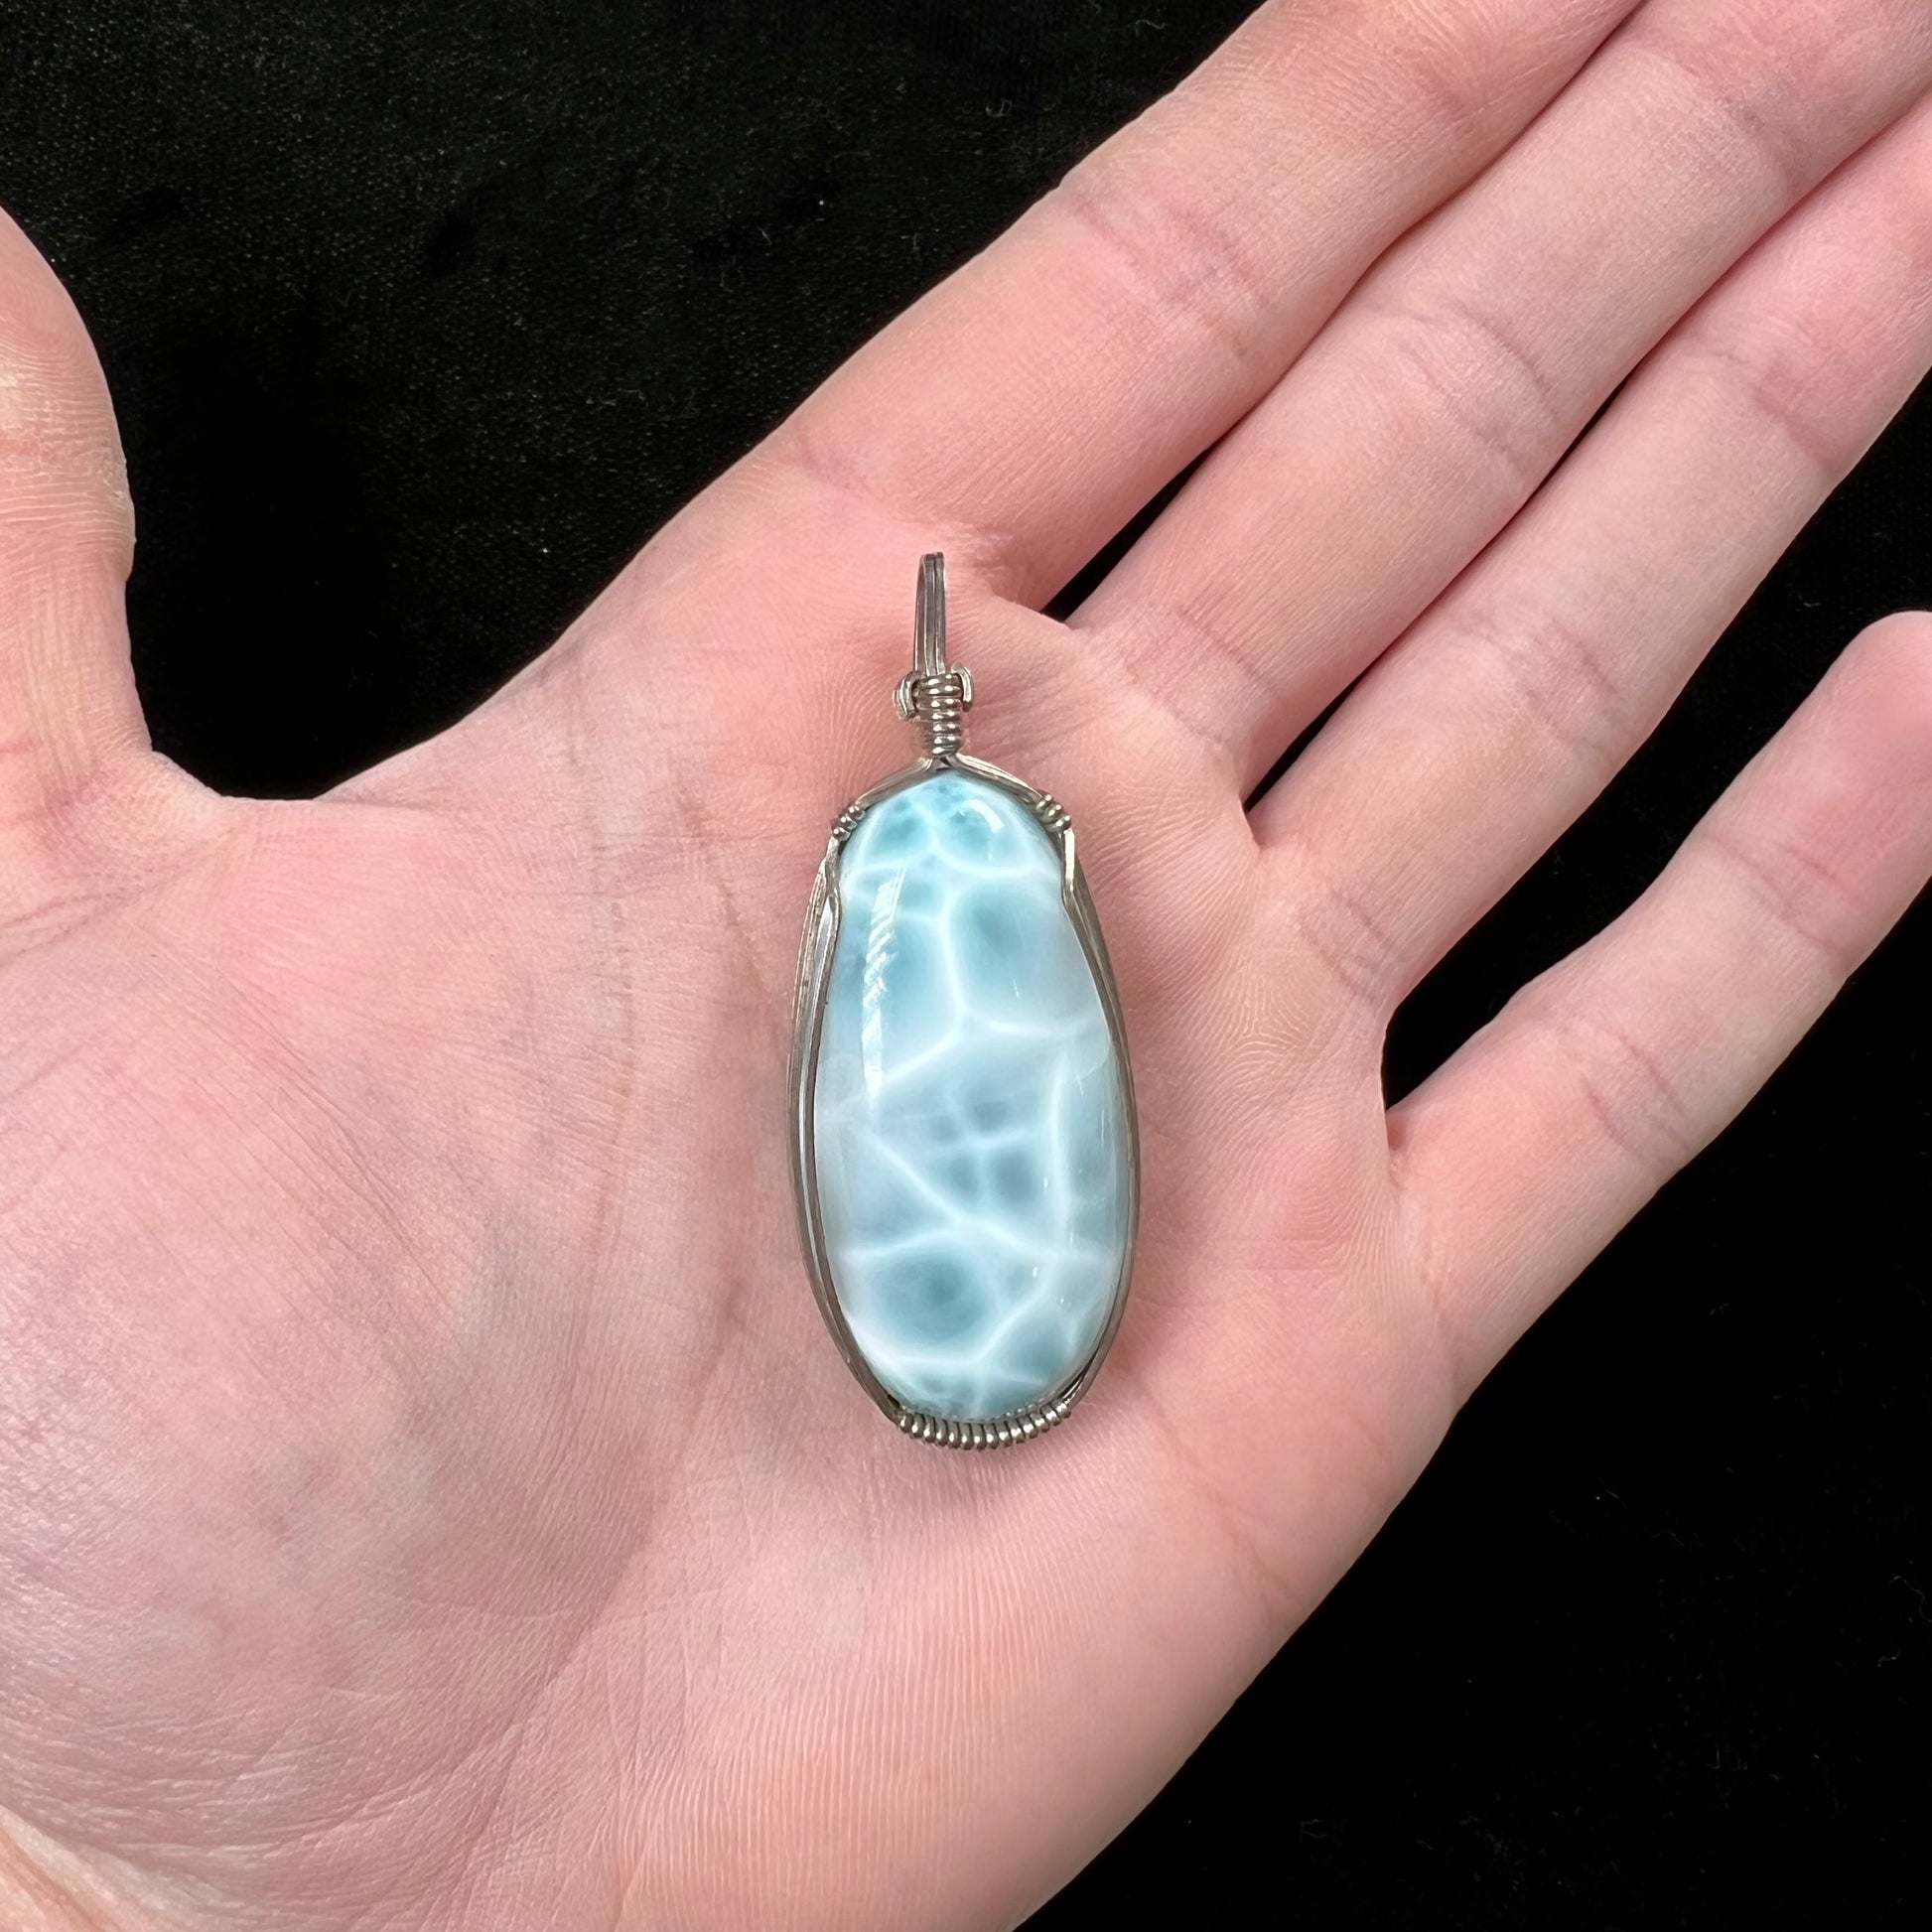 A large, oval cabochon cut blue larimar stone mounted in a sterling silver wire wrapped pendant.